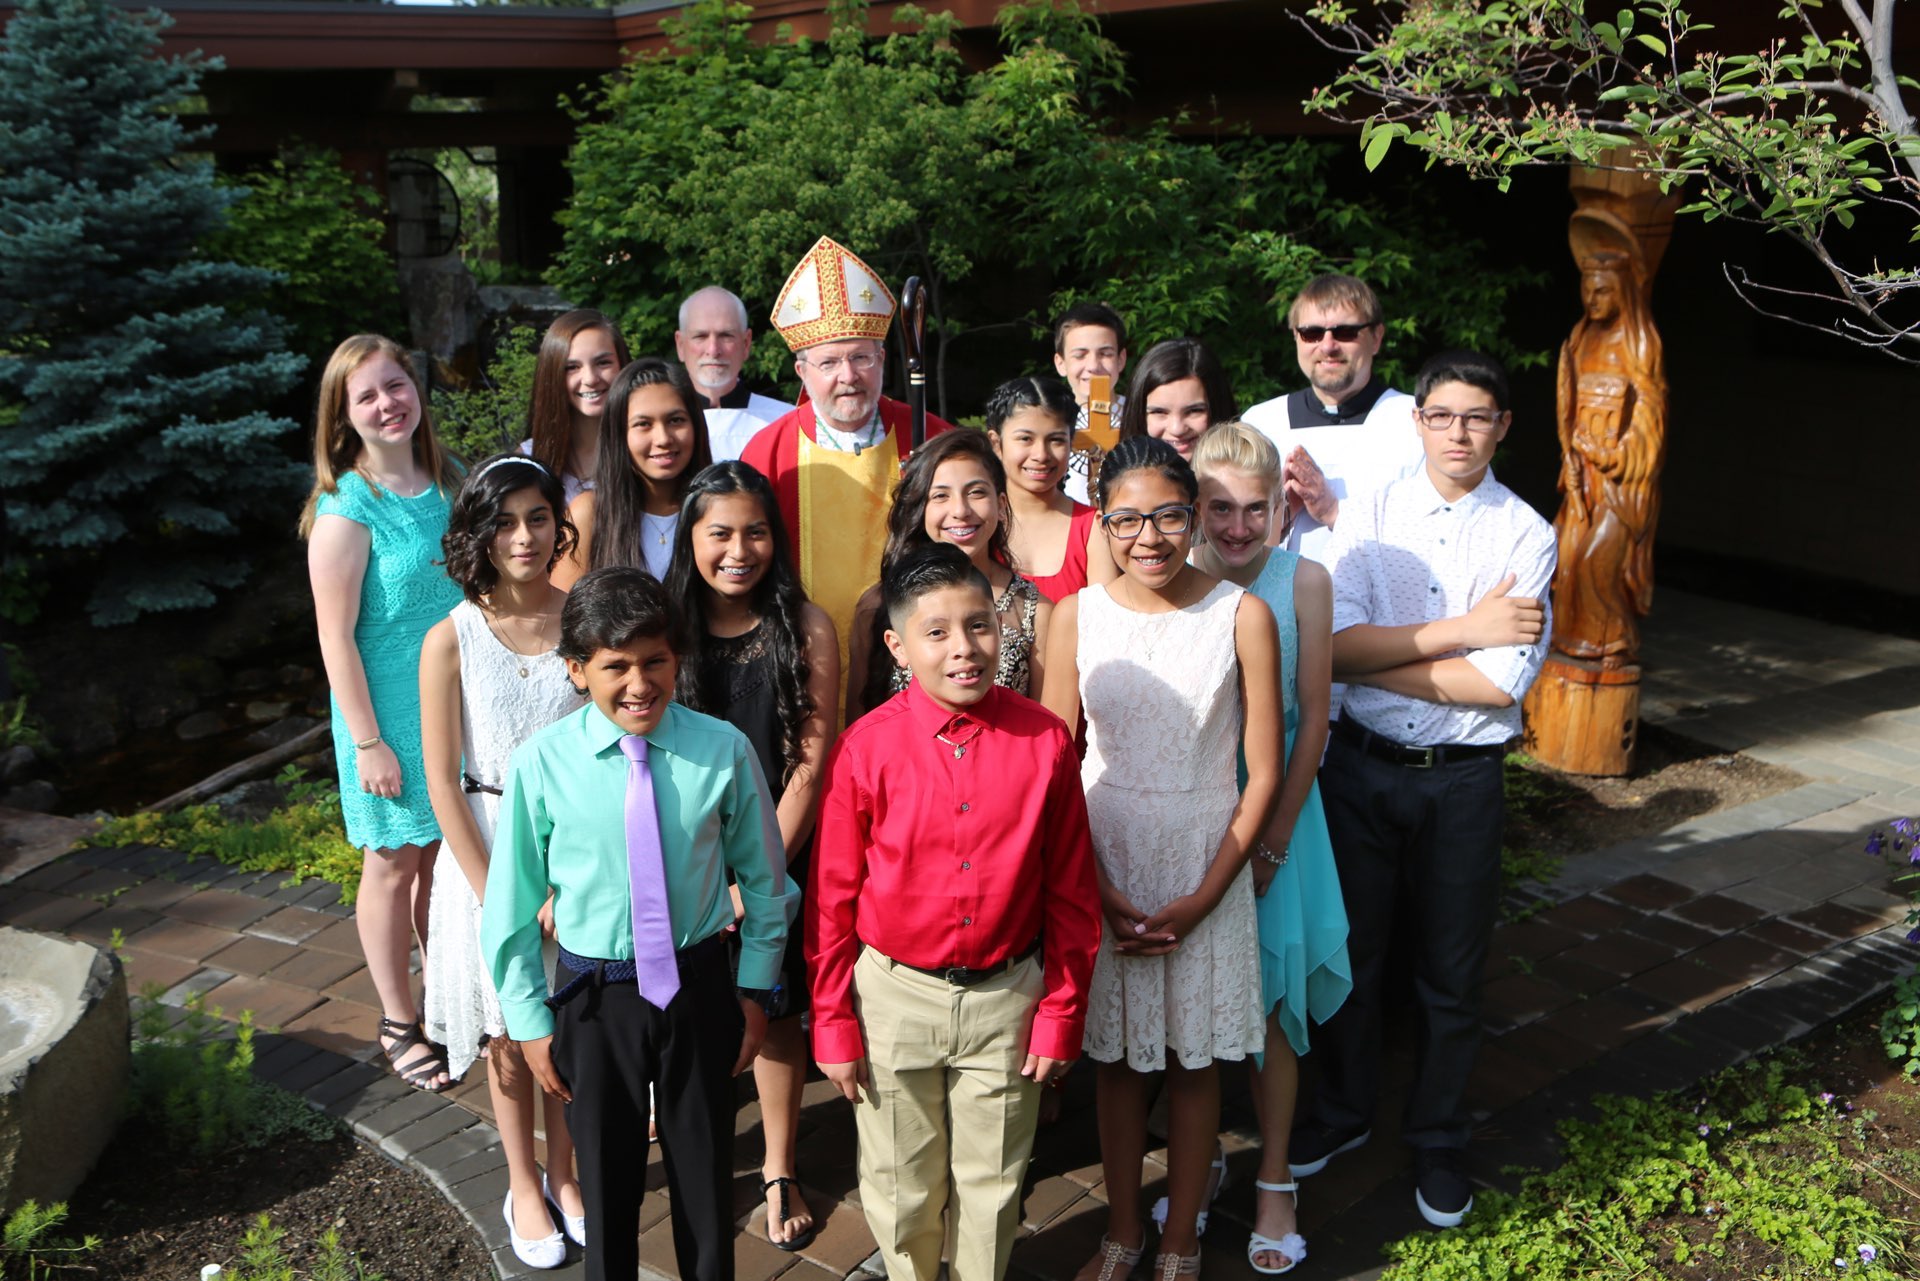 Bishop Cary and Confirmation Class of 2017